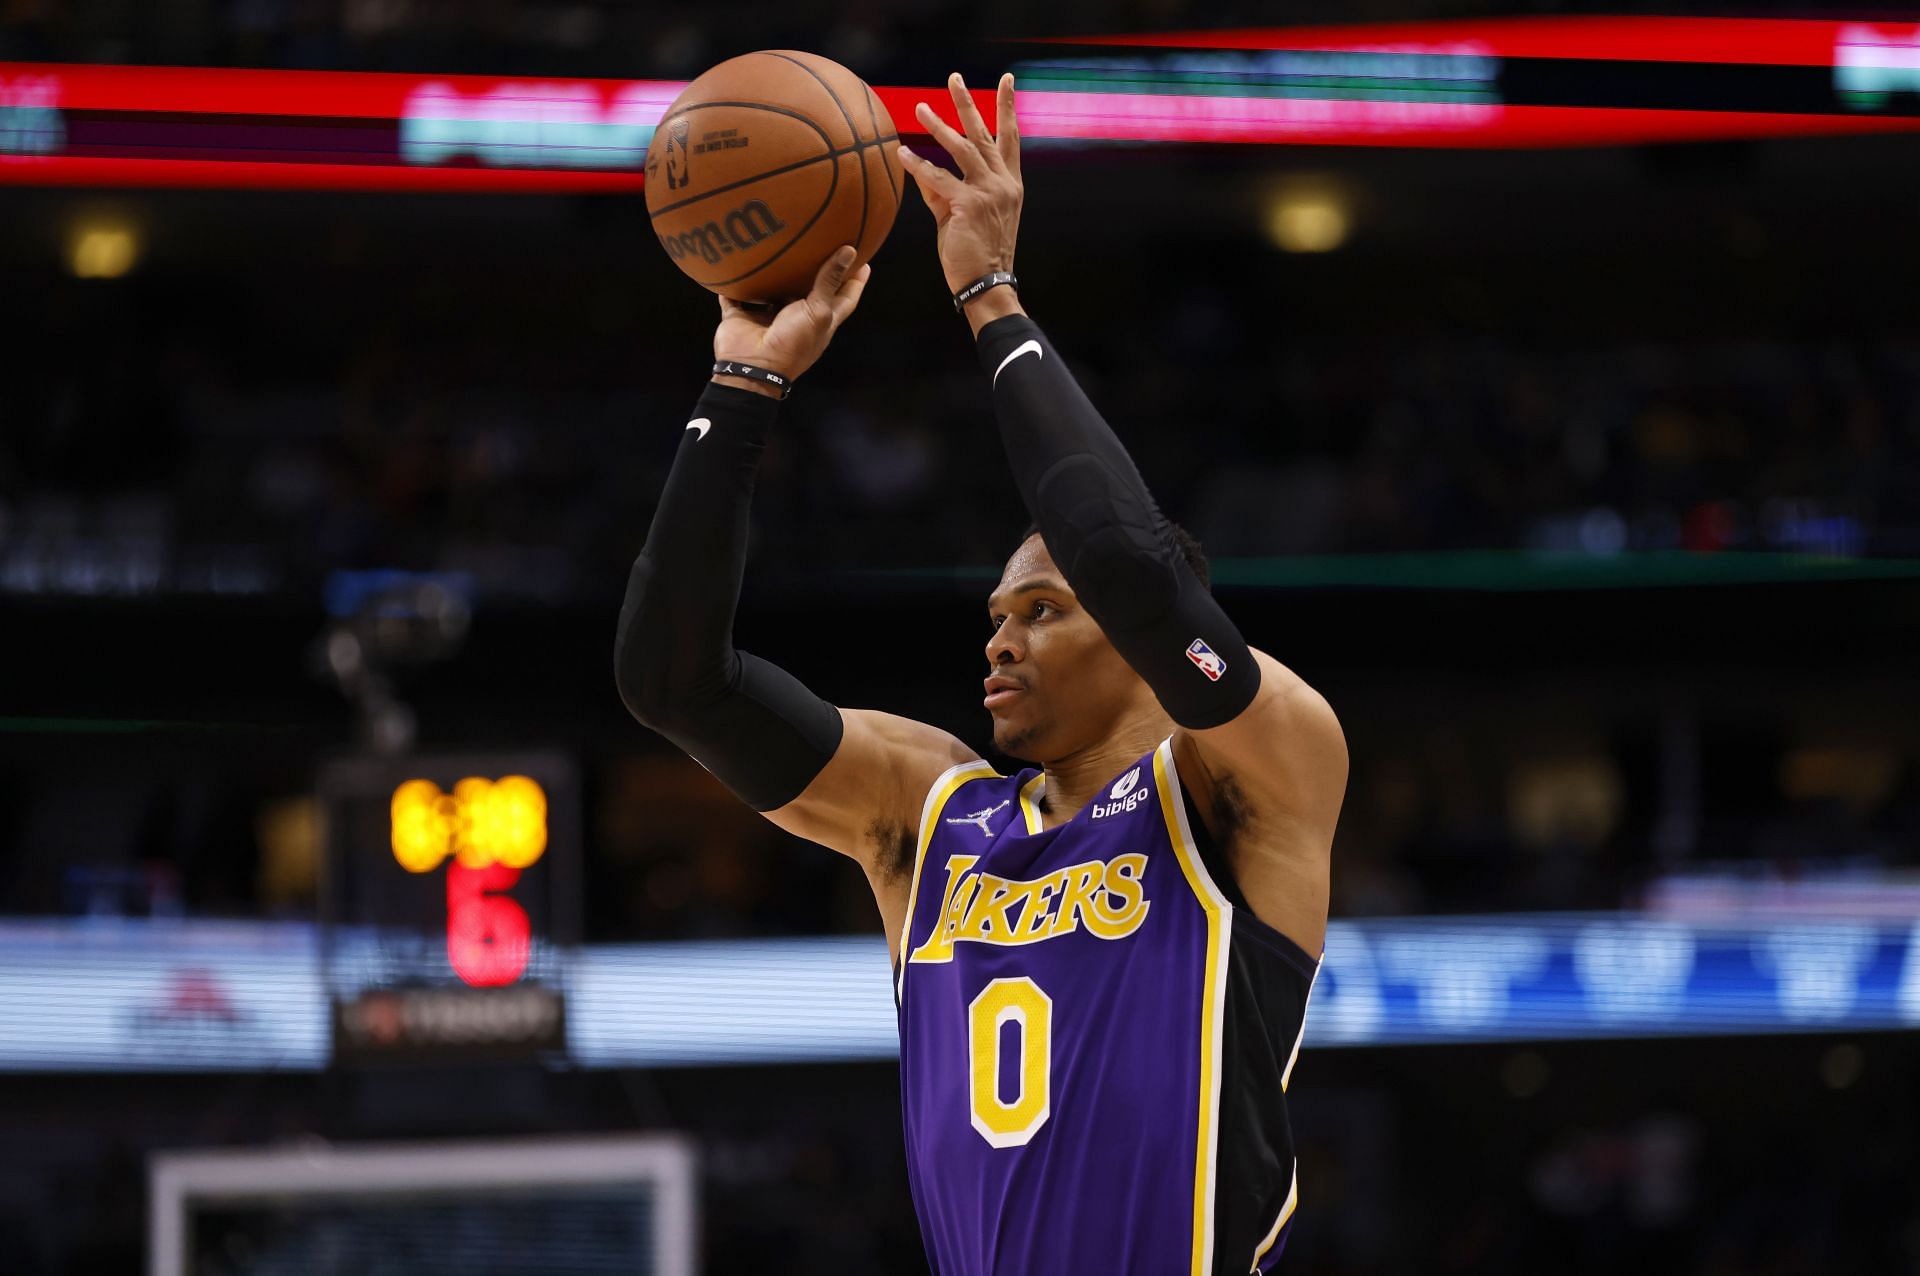 Russell Westbrook of the LA Lakers shoots.